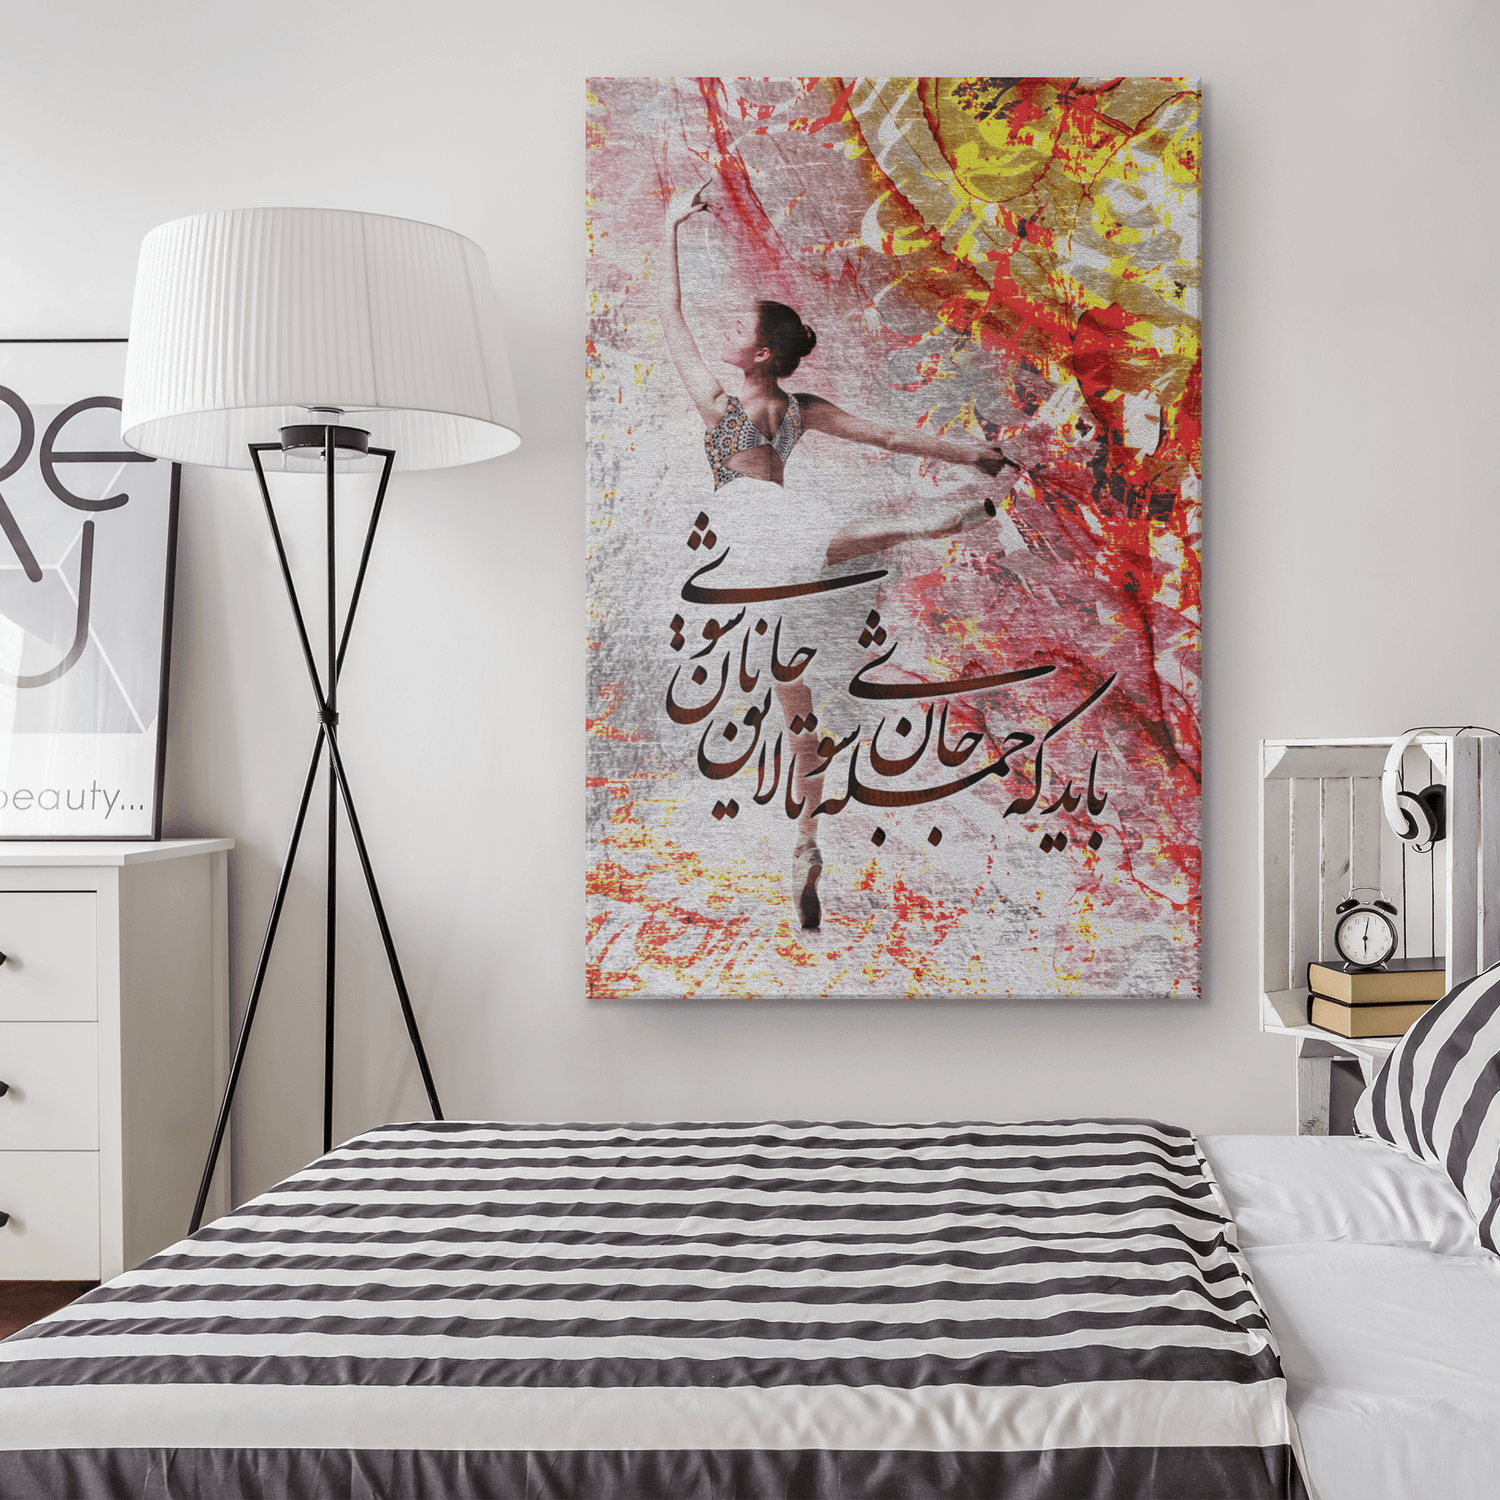 Persian Wall art, Persian Calligraphy, Persian Home, Persian giftsPersian calligraphy wall art, High Quality and Ready to Hang. This Modern Persian Wall décor completes and elevates your home. Amazing and eye-catching for your home or office.